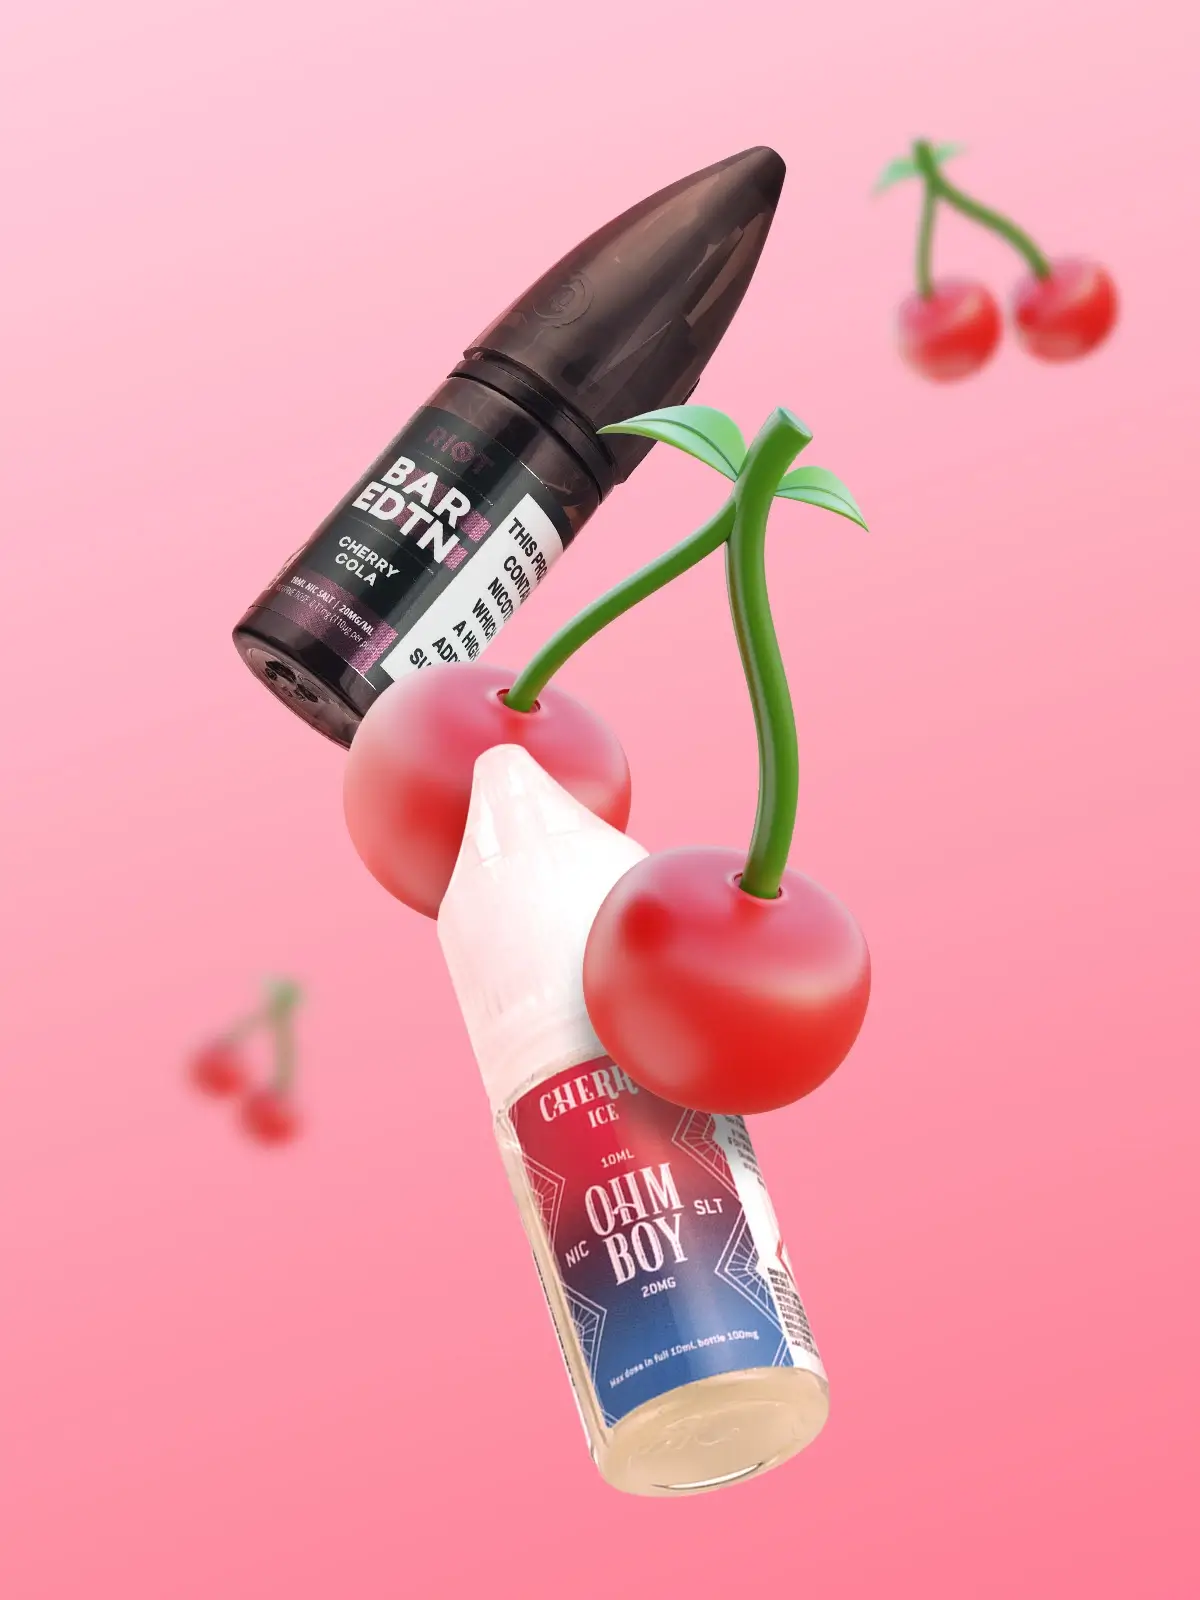 Two bottles of cherry flavoured e-liquid; Ohm Boy Cherry and Riot Bar Edtn Blue Cherry Burst, with some decorative cherries floating in front of a pink background